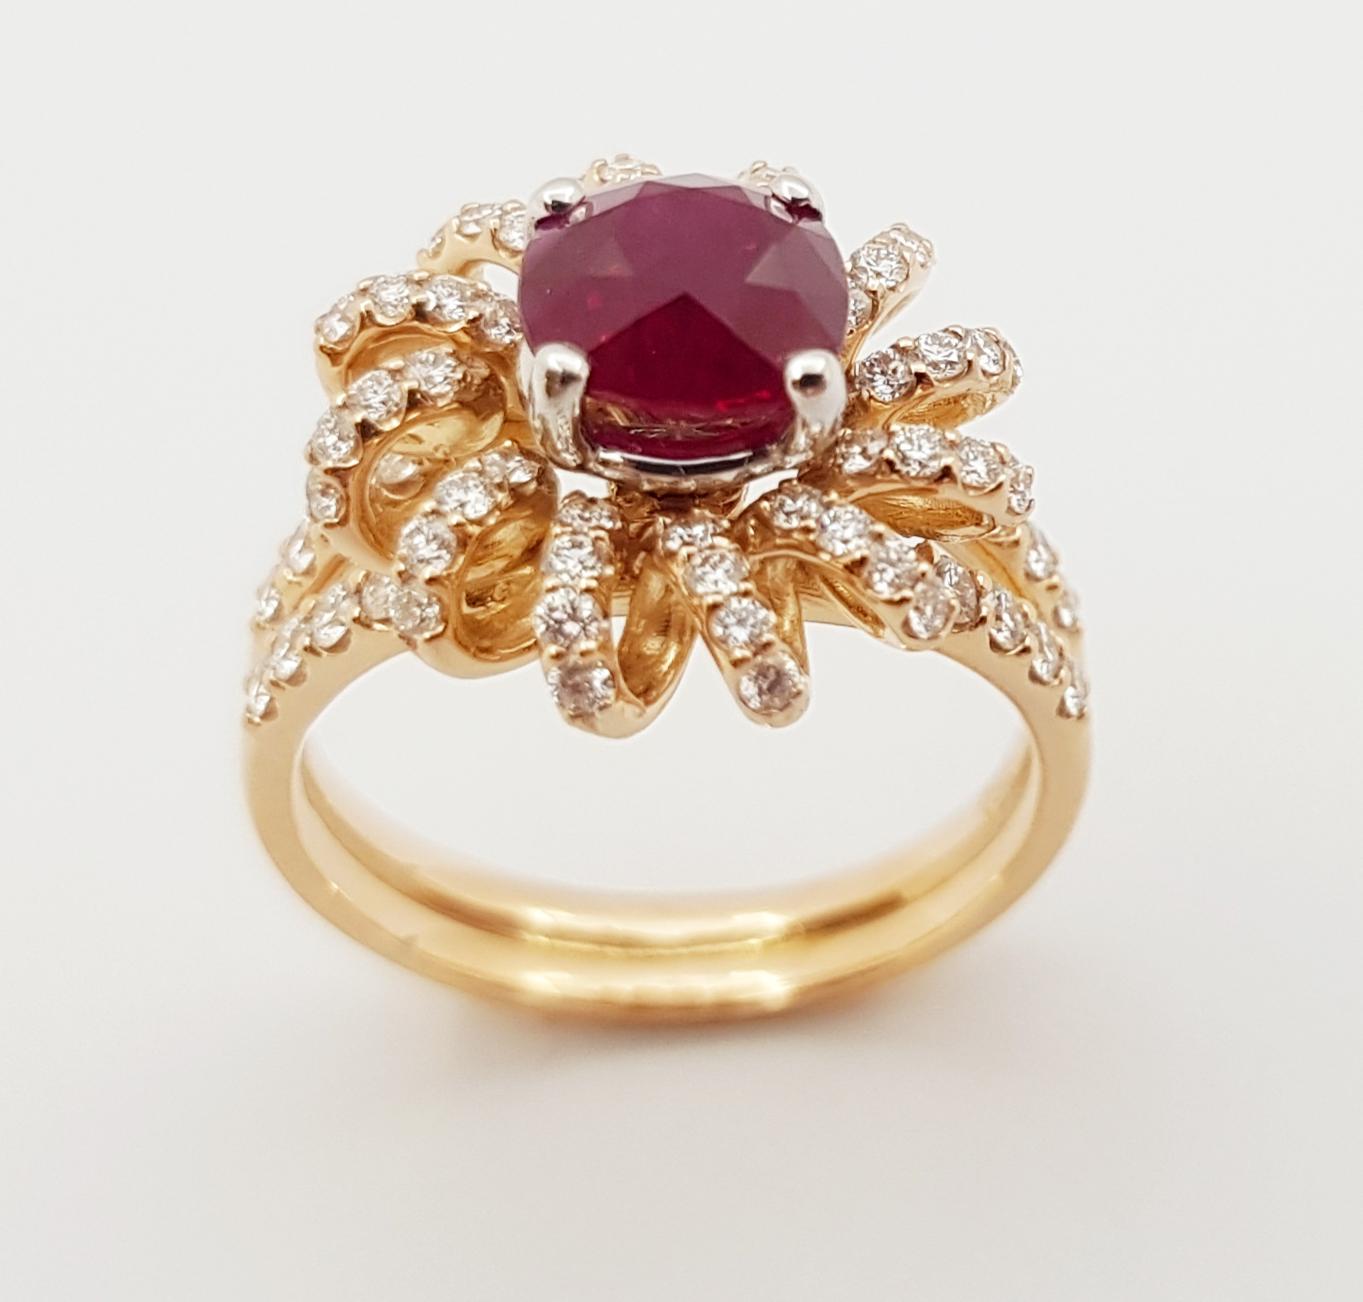 Certified Burmese Pigeon's Blood Ruby with Diamond Ring Set in 18K Rose Gold For Sale 5